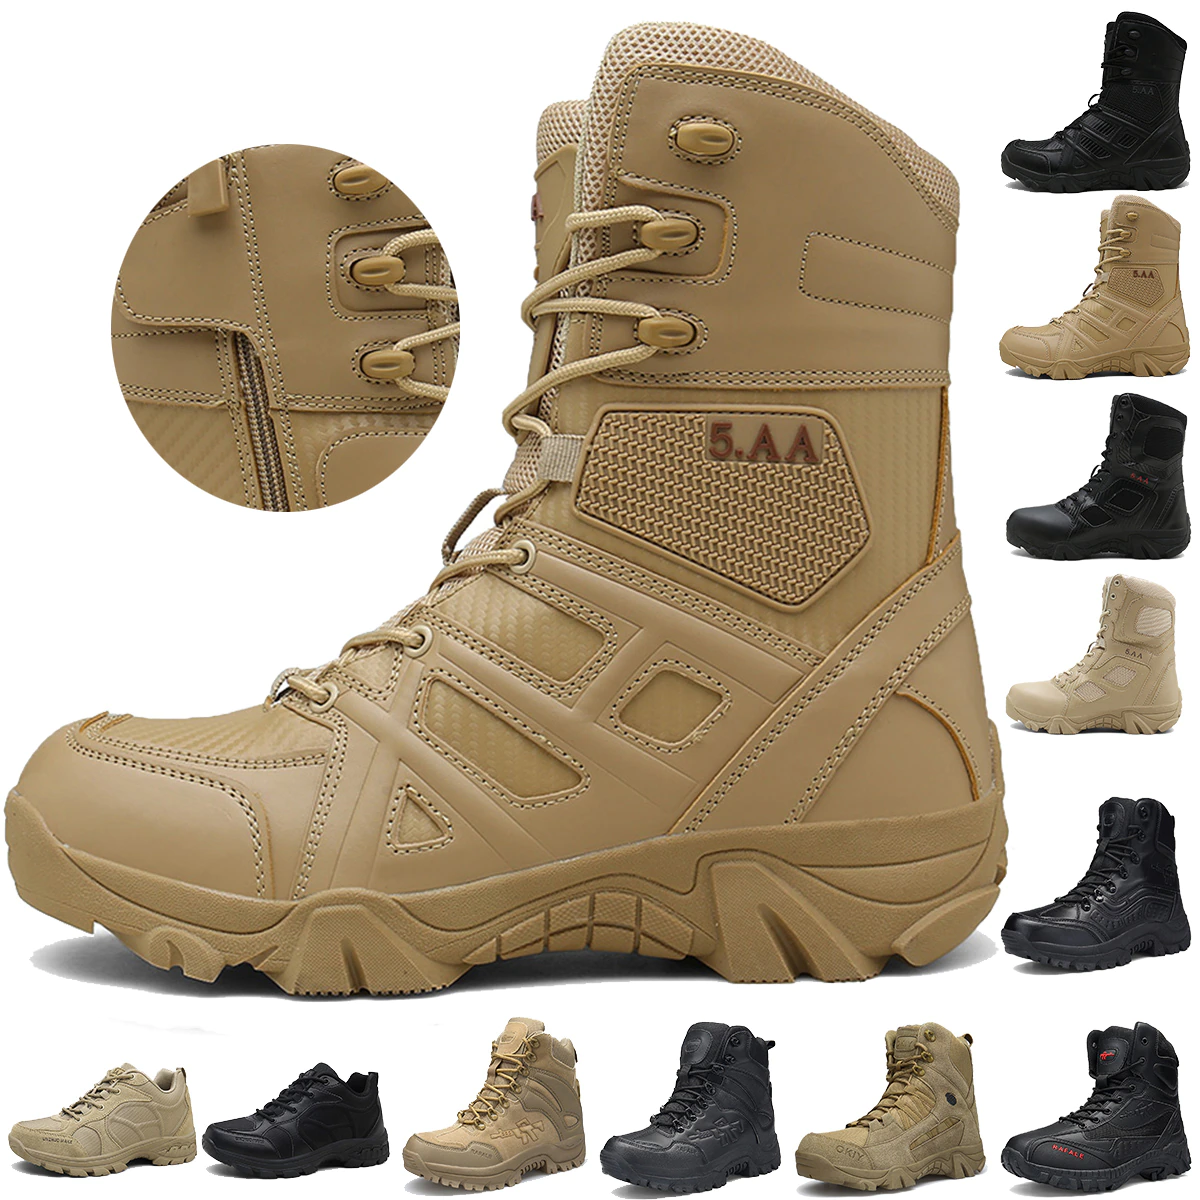 Cungel Work-Shoes Snow-Boots Ankle-Boats Desert-Combat Special Army Tactical Winter Autumn